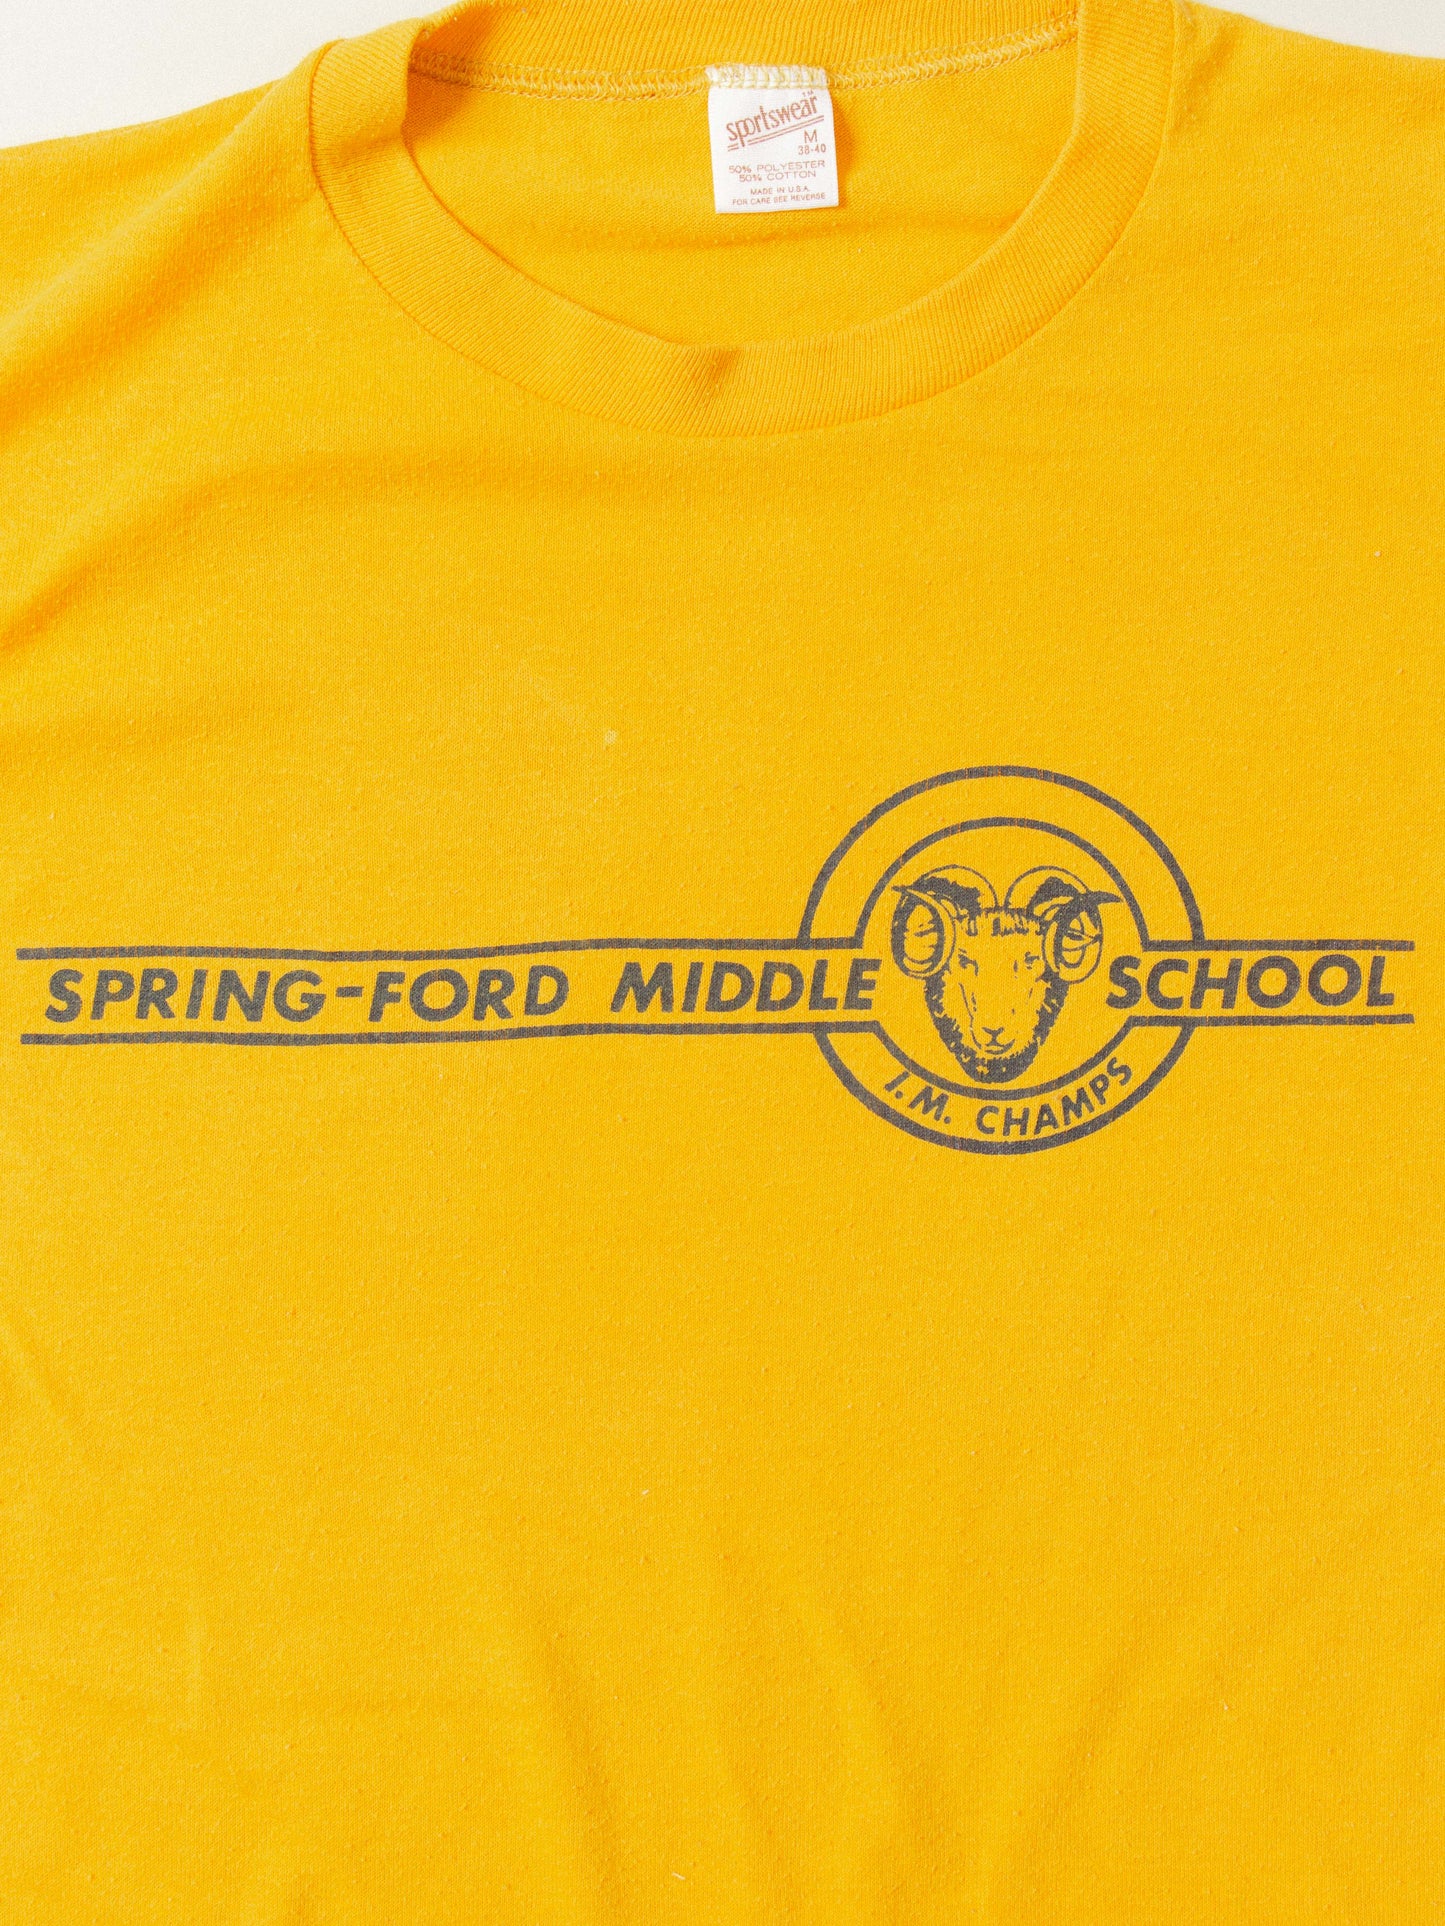 Vtg 80s Spring-Ford Tee - Made in USA (M)